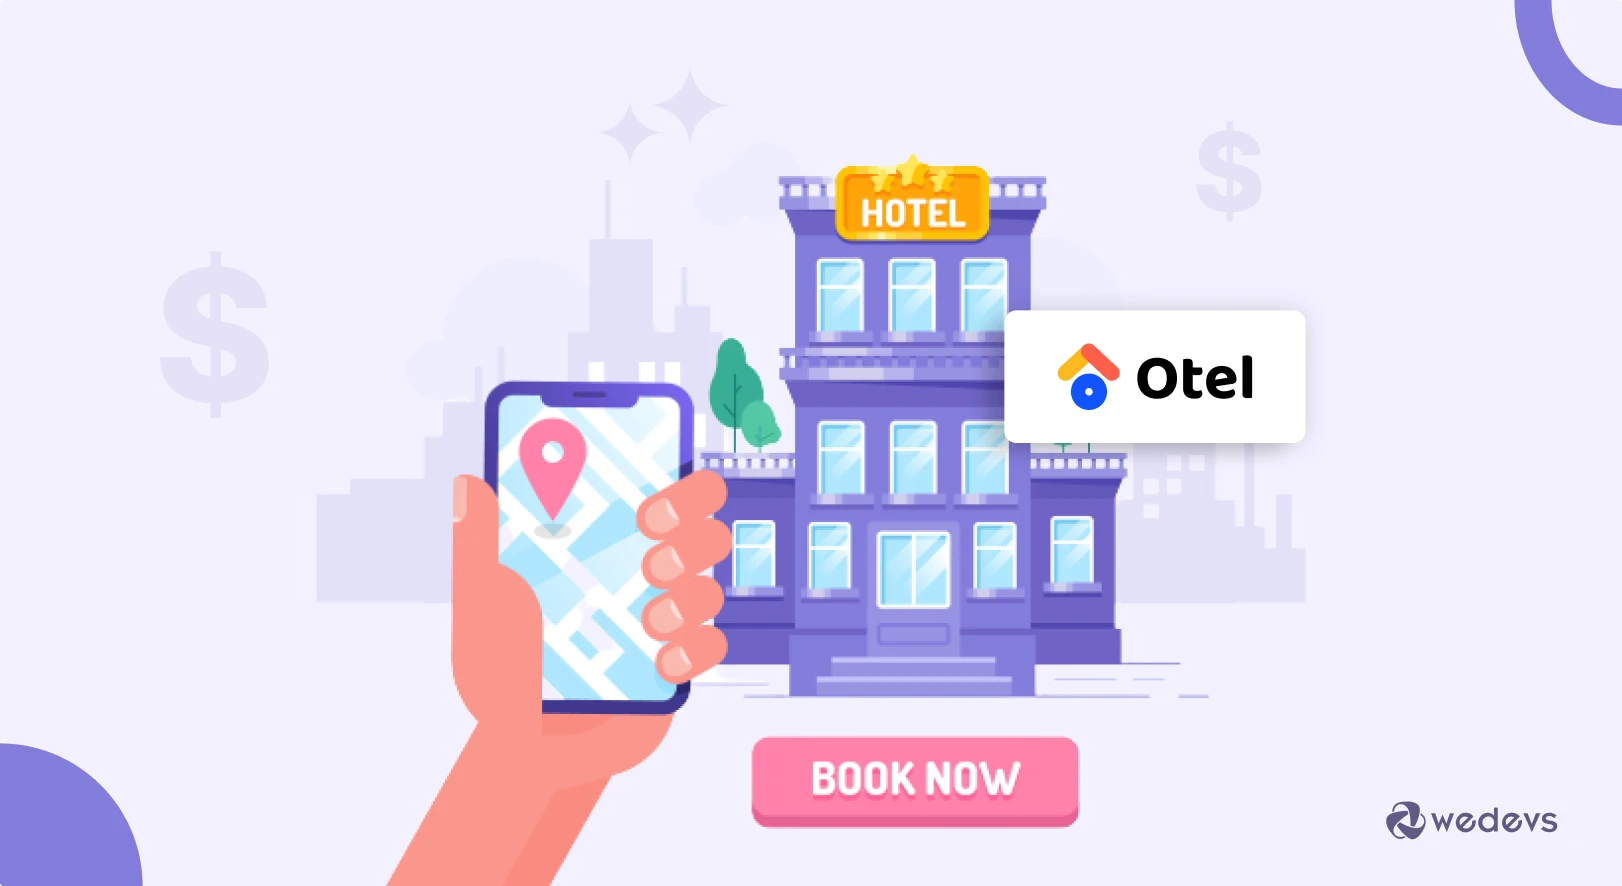 Build A Full-Functional Hotel Booking Website and Make Money Online